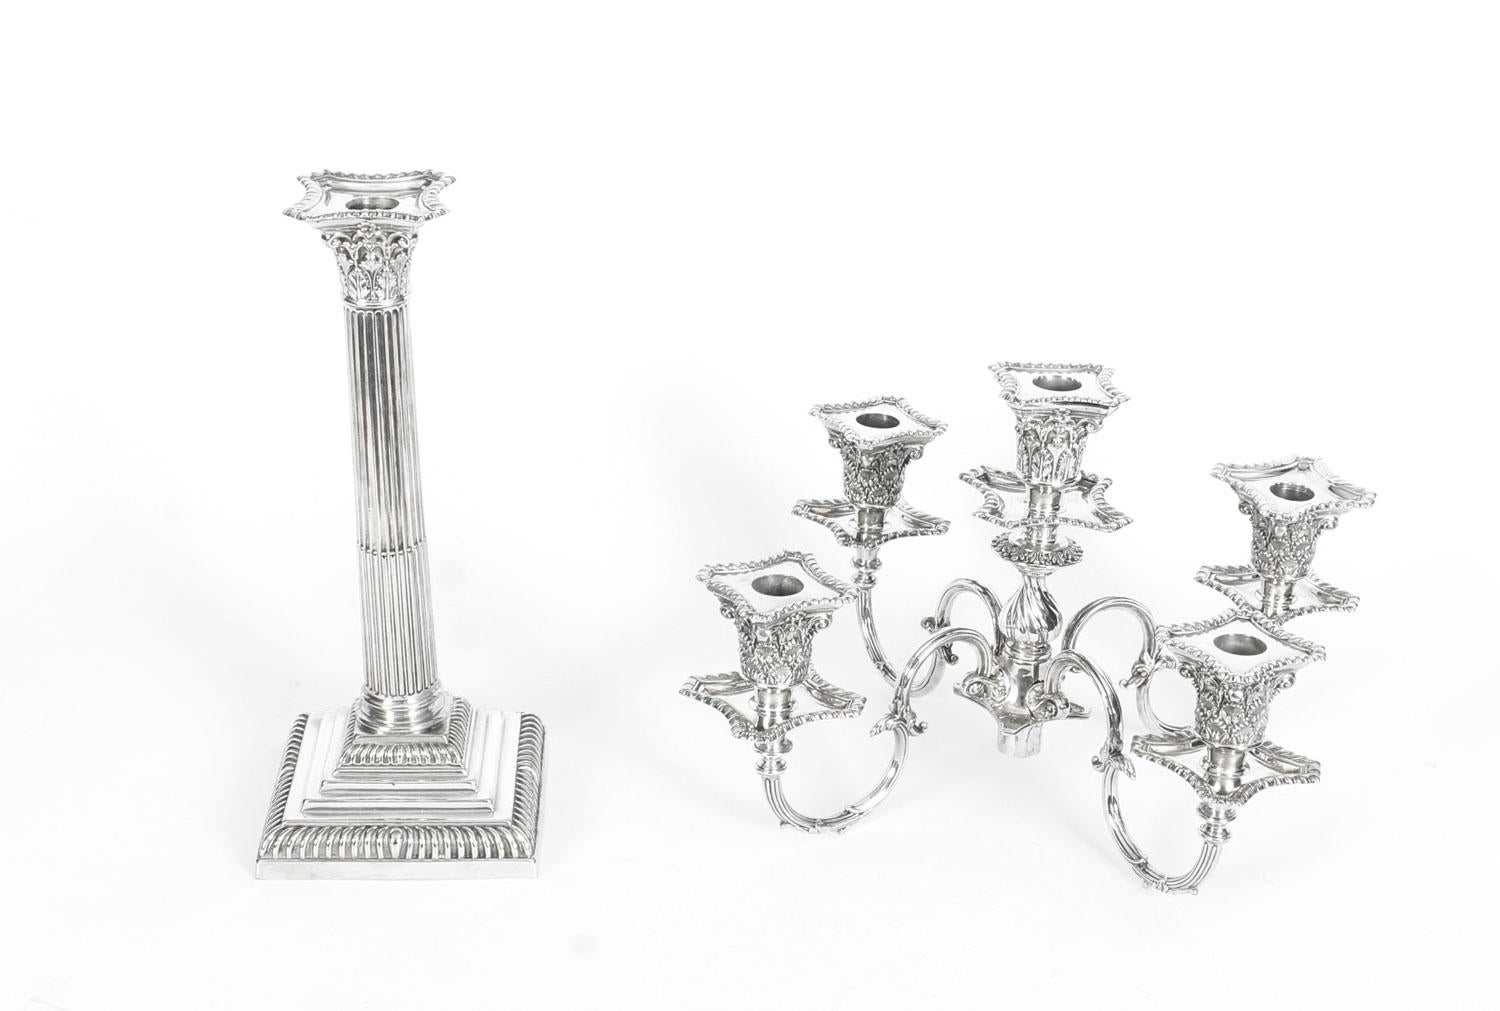 Silver Plate Antique Pair of Five-Light Candelabra by Mappin & Webb, 19th Century